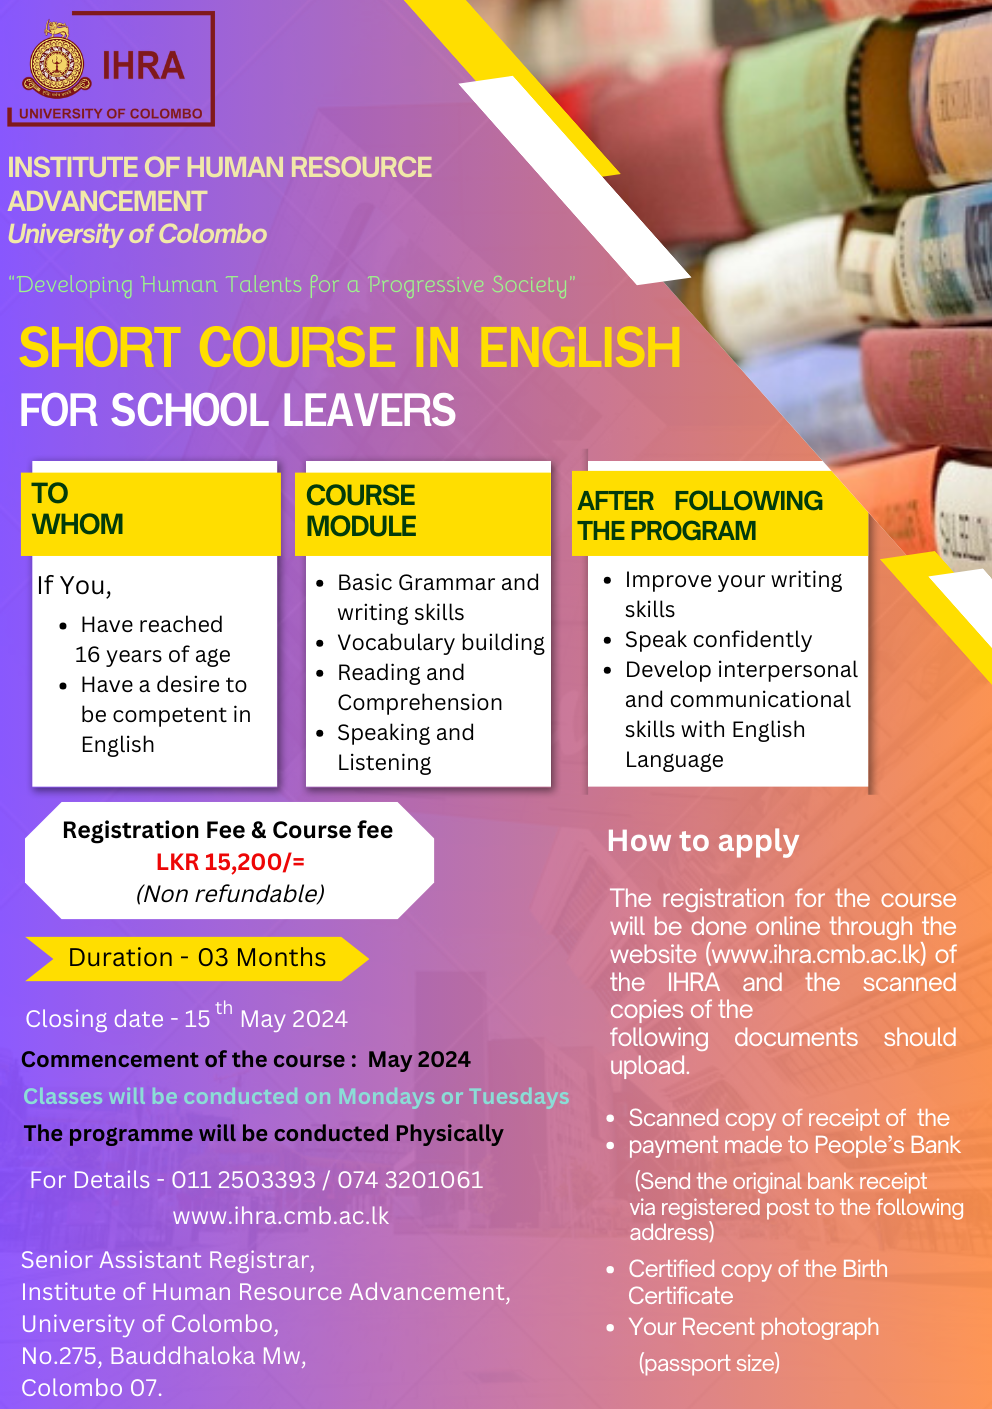 Short Course in English for School Leavers (Intake 2024) - University of Colombo